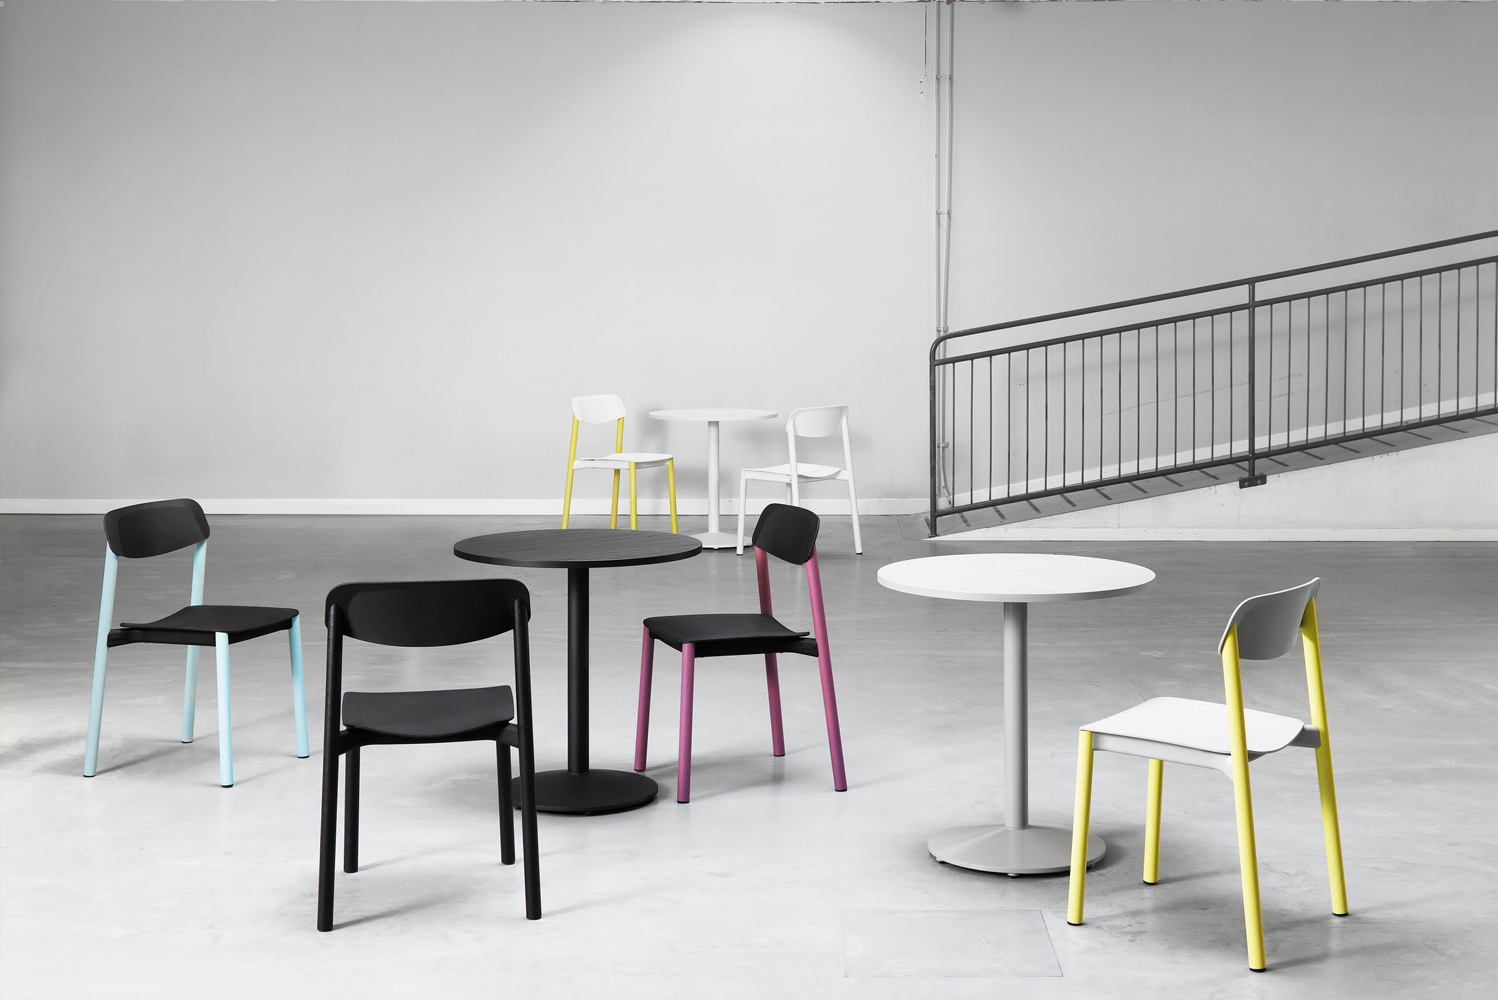 Introducing Penne by Swedish contract furniture brand Lammhults the worlds first chair with legs created using laminated wo